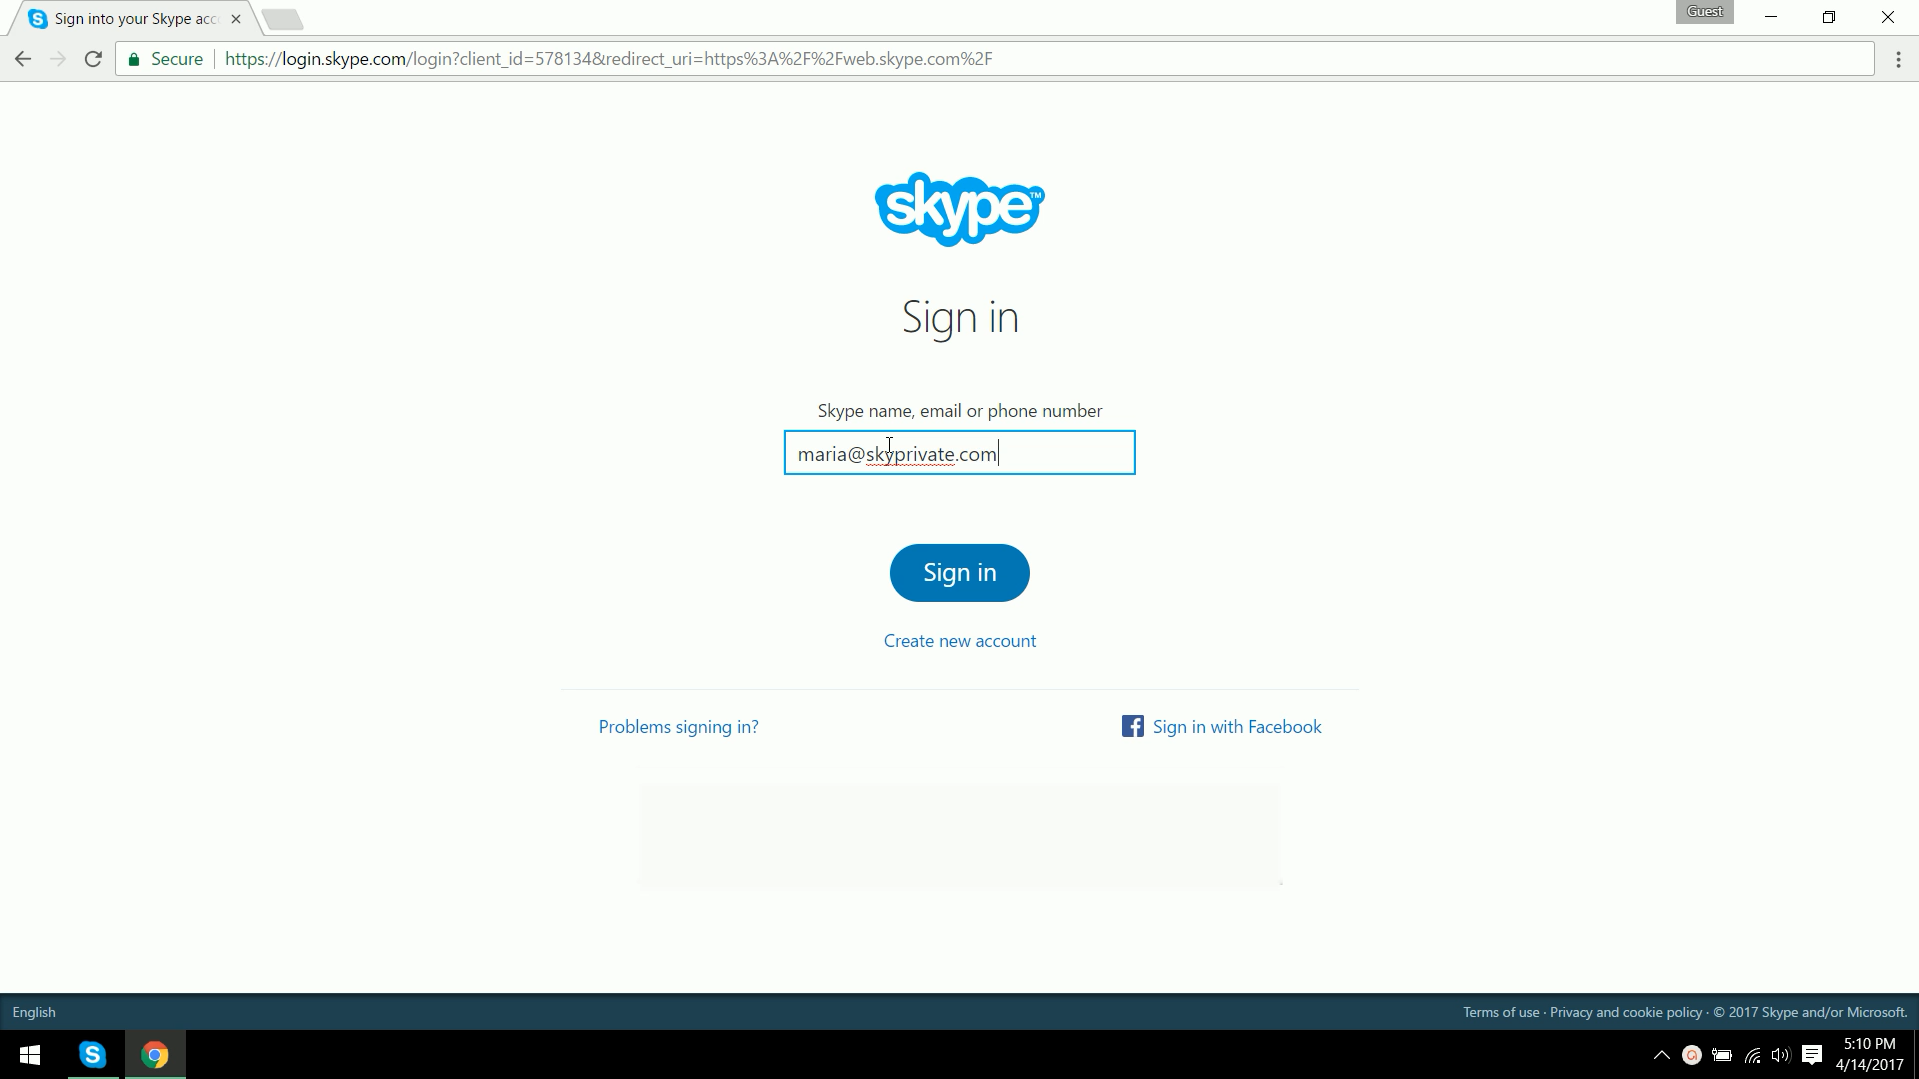 I don’t know my Skype ID. 